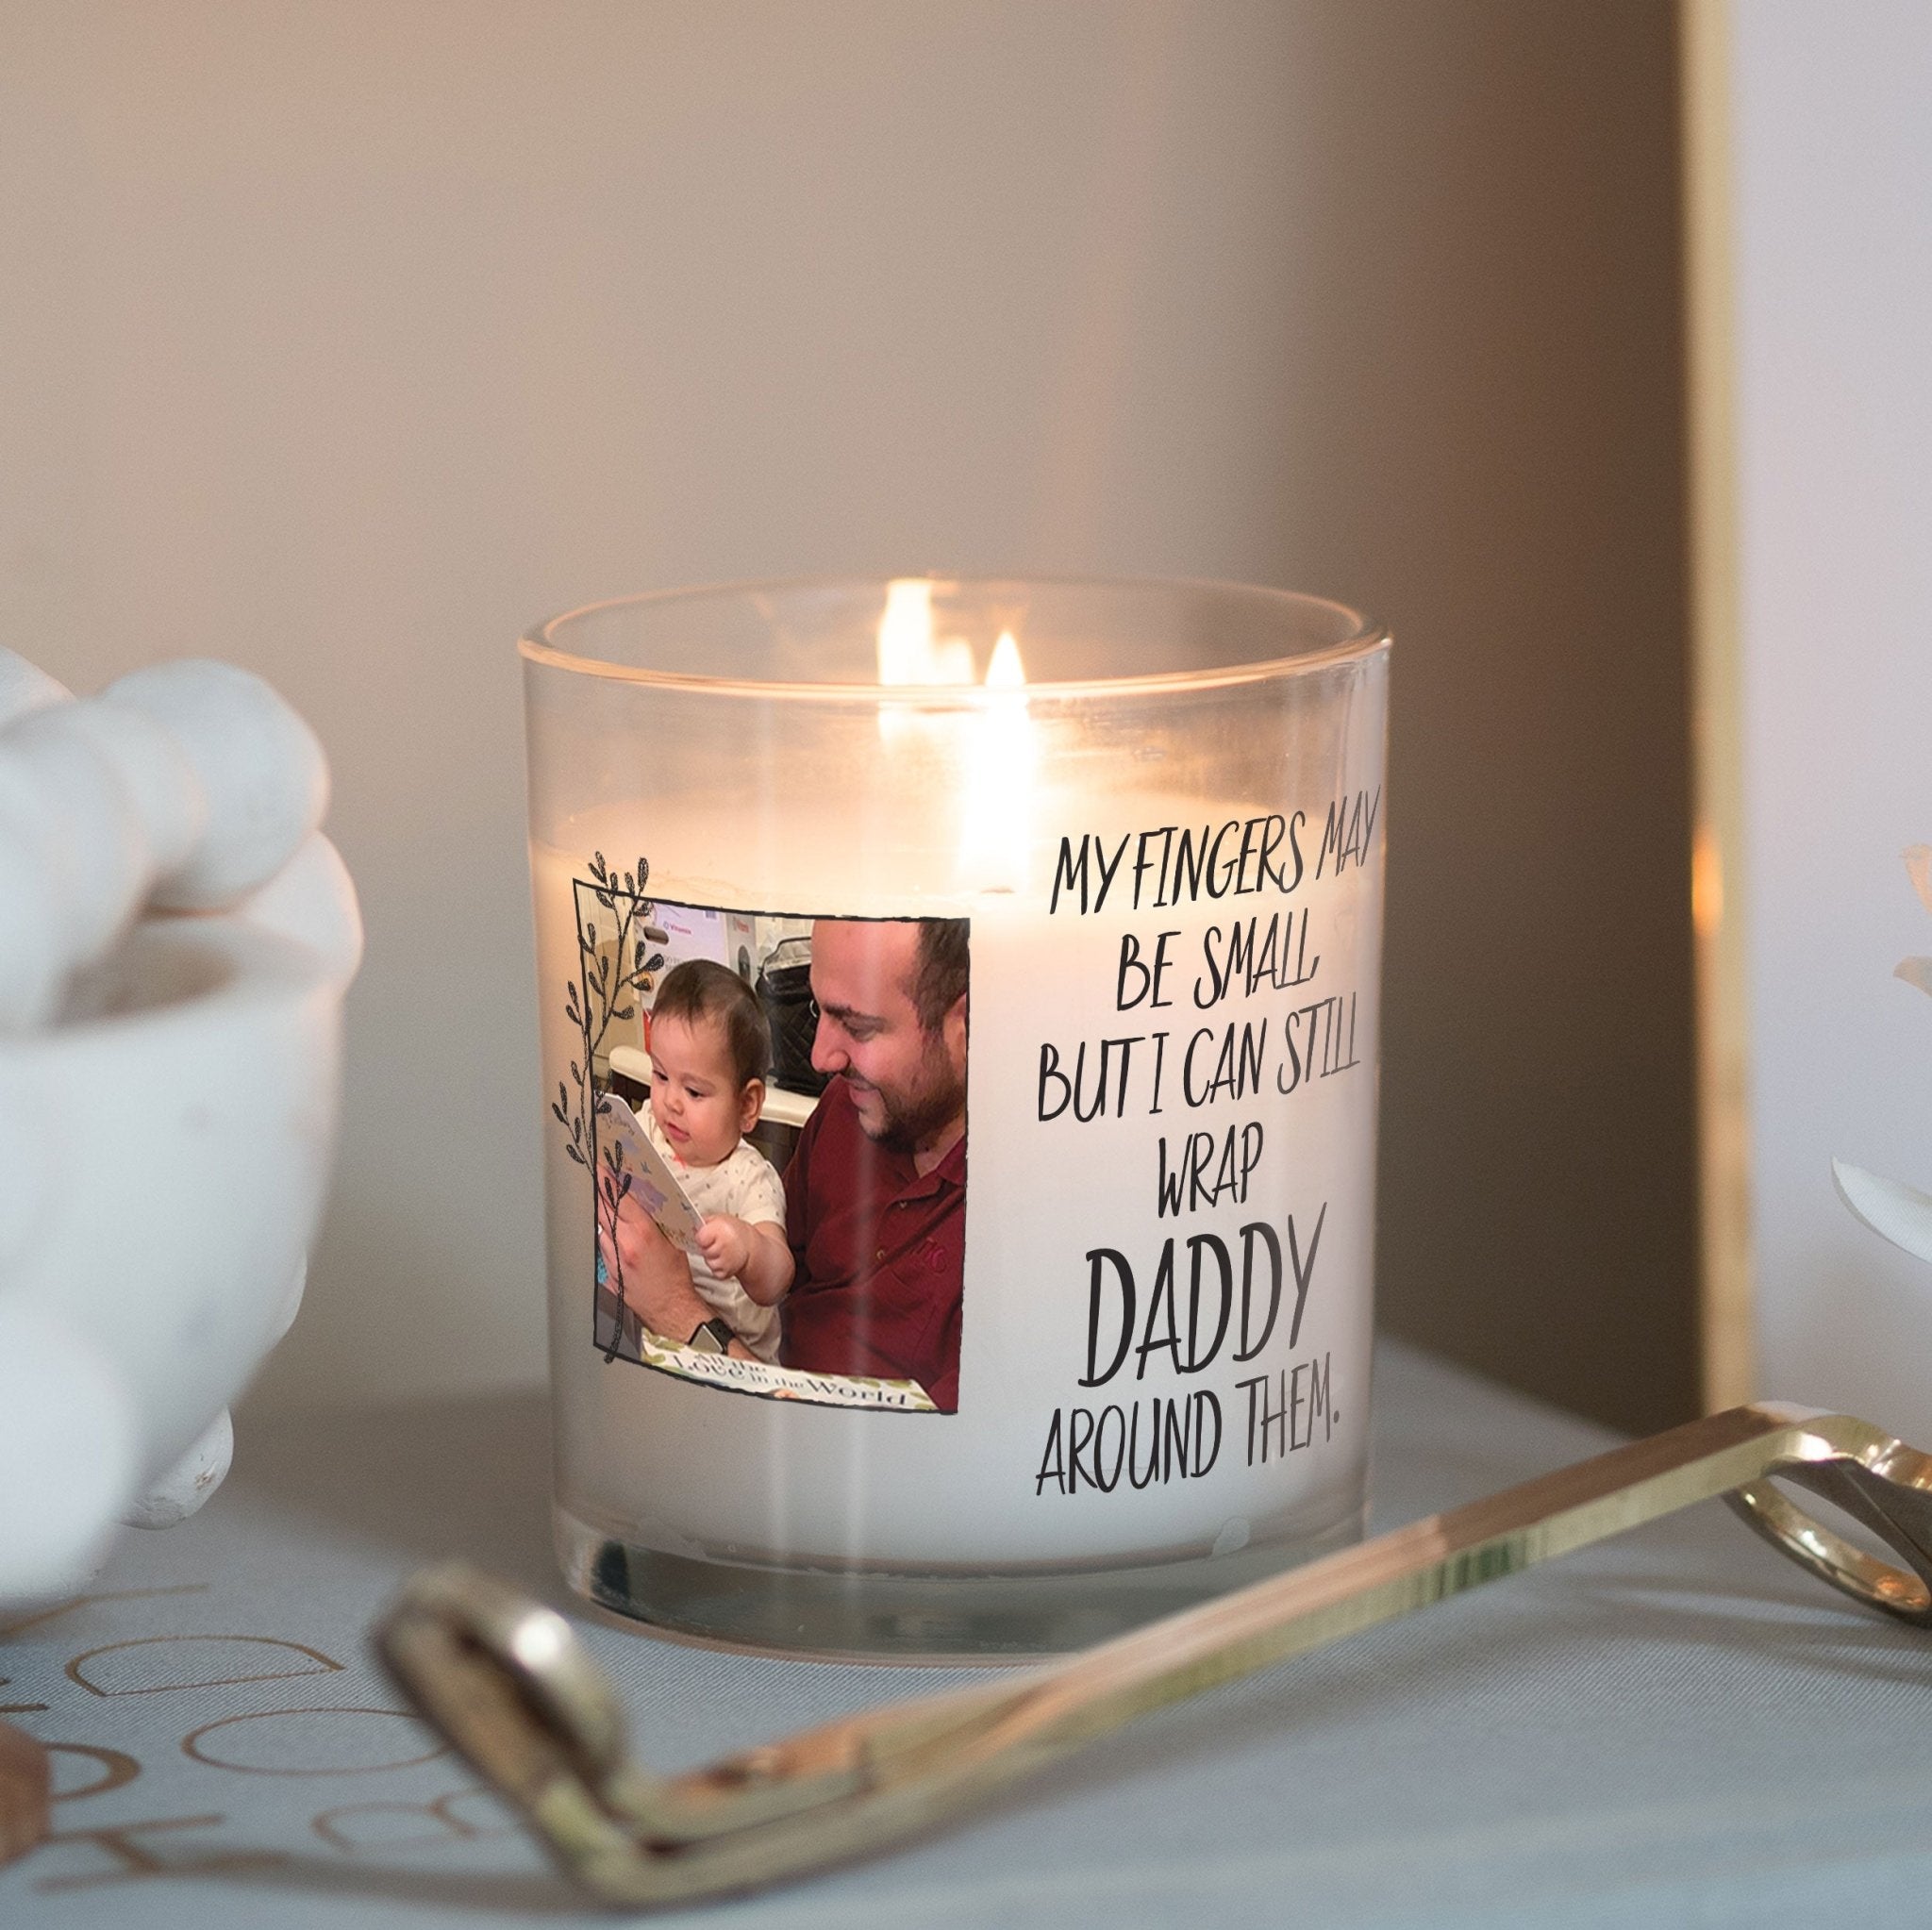 New Dad Personalized Photo Candle Holder | Daddy Quotation Gift Ideas | Personalized Votive Glass with Picture | Crystal Home Decor Present Candleholder - Unique Prints